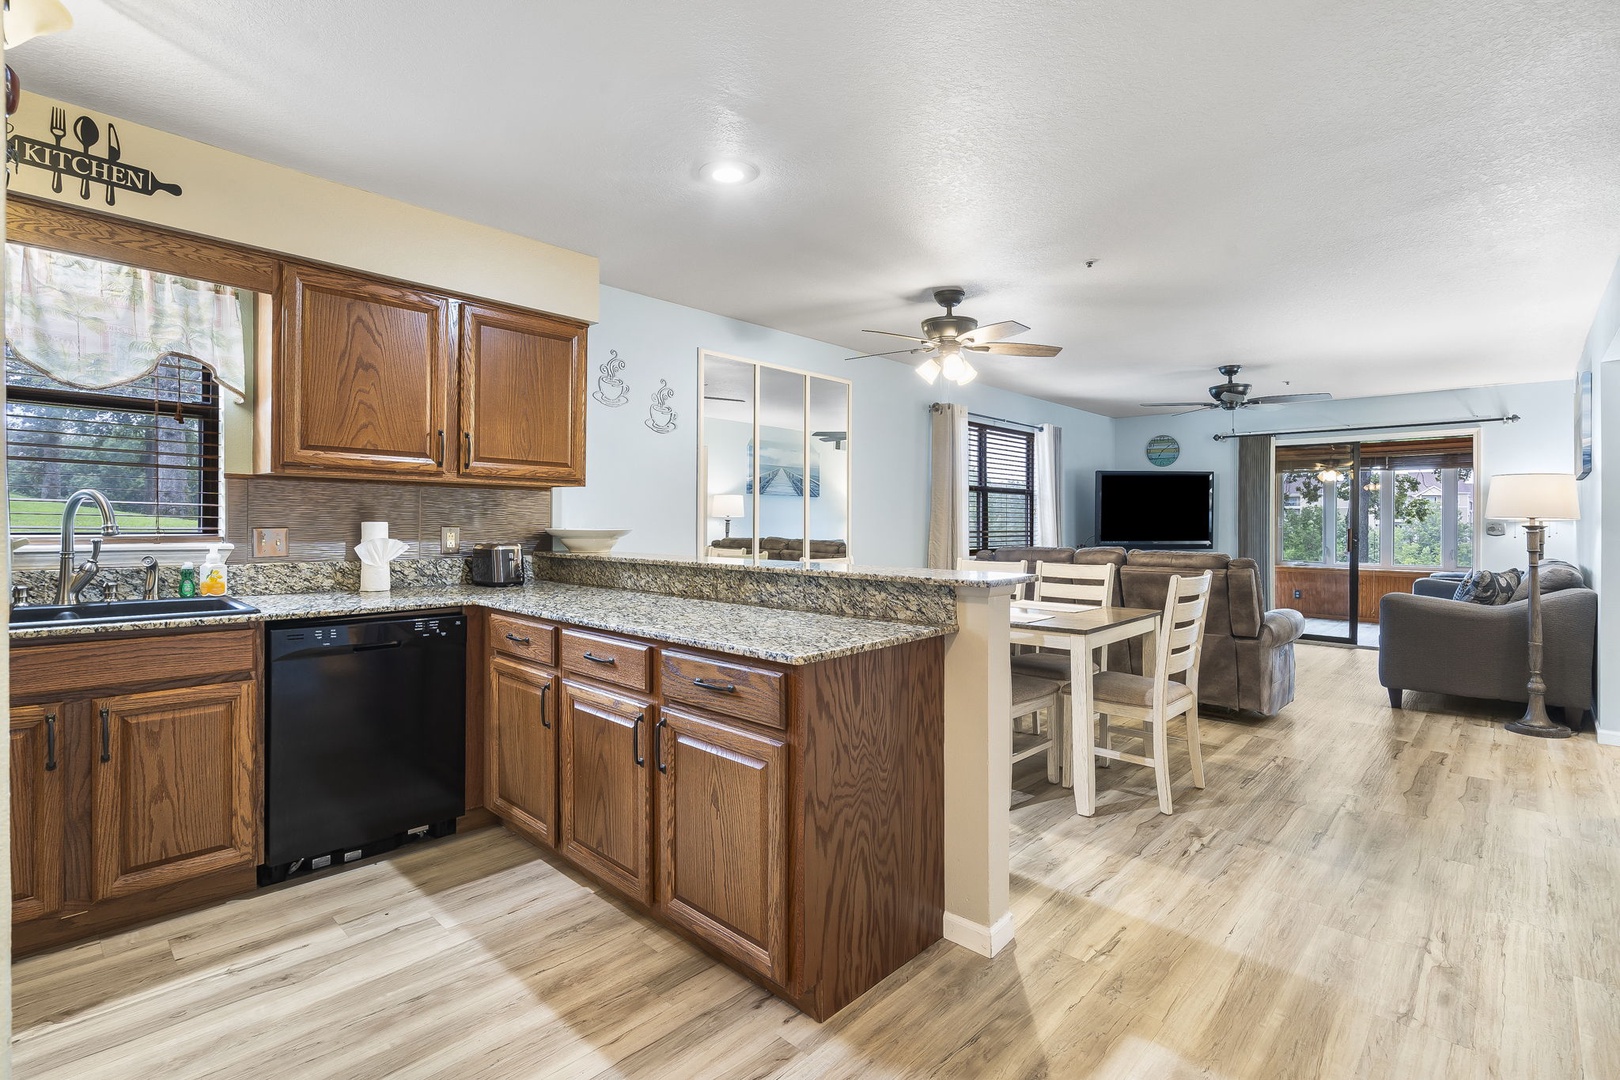 Enjoy the breezy, open layout between the kitchen & dining/living spaces